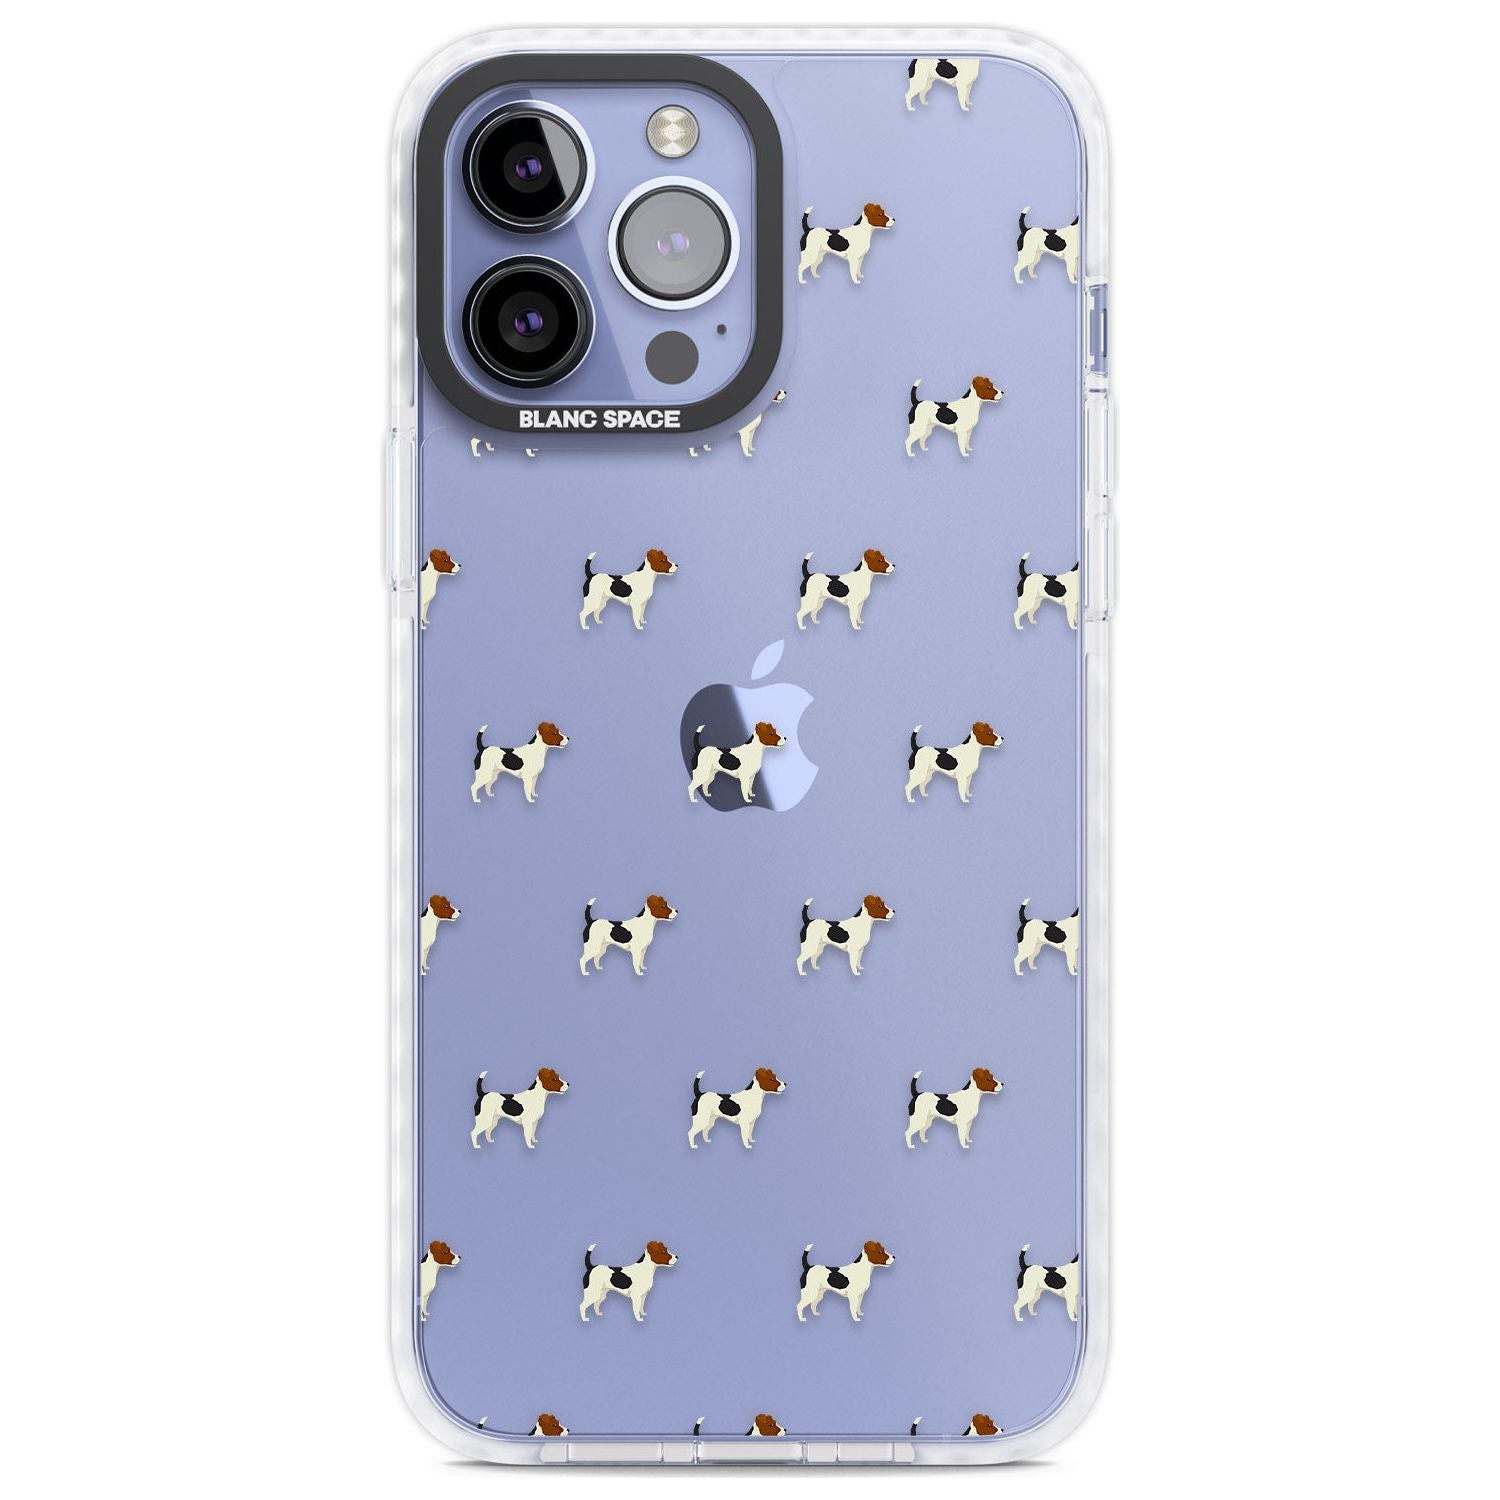 Jack Russell Terrier Dog Pattern Clear Phone Case iPhone 13 Pro Max / Impact Case,iPhone 14 Pro Max / Impact Case Blanc Space